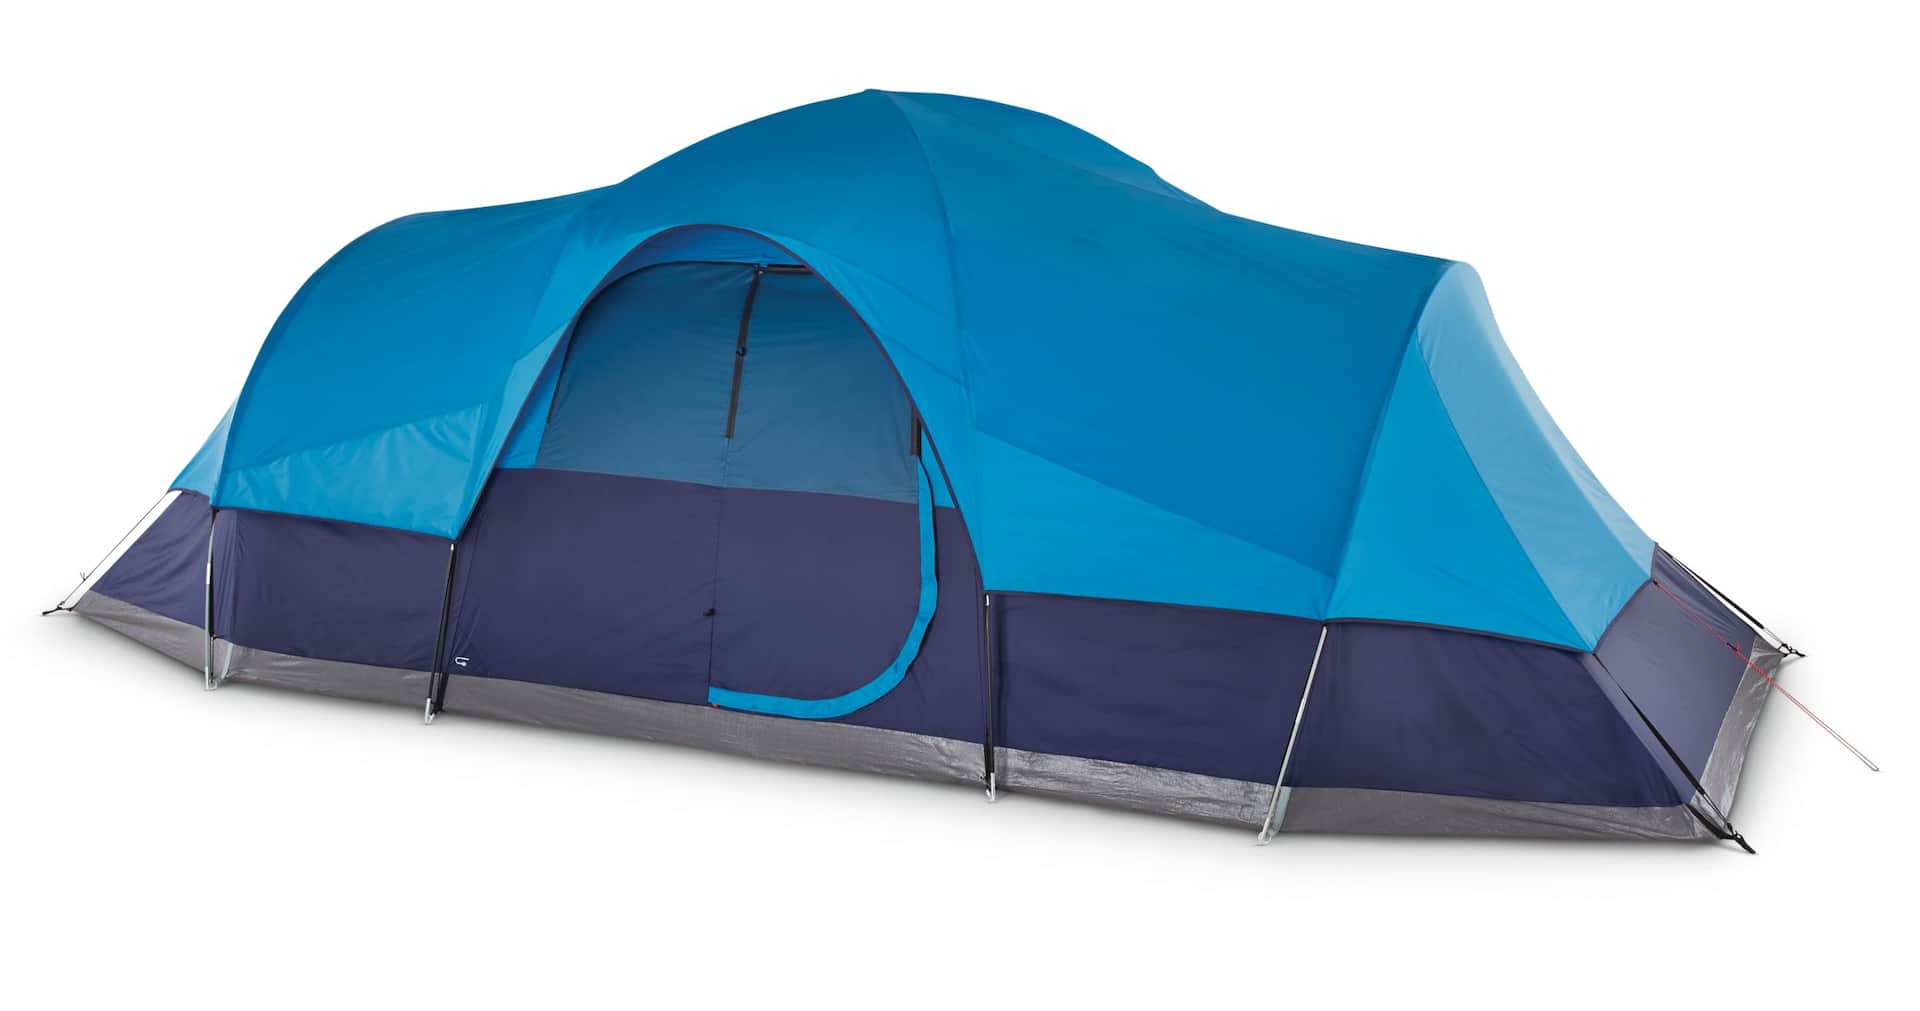 https://media-www.canadiantire.ca/product/playing/camping/tents-shelters/0765456/outbound-12-person-dome-tent-bbb601b9-7ce0-4df5-9c9b-906e973e4938-jpgrendition.jpg